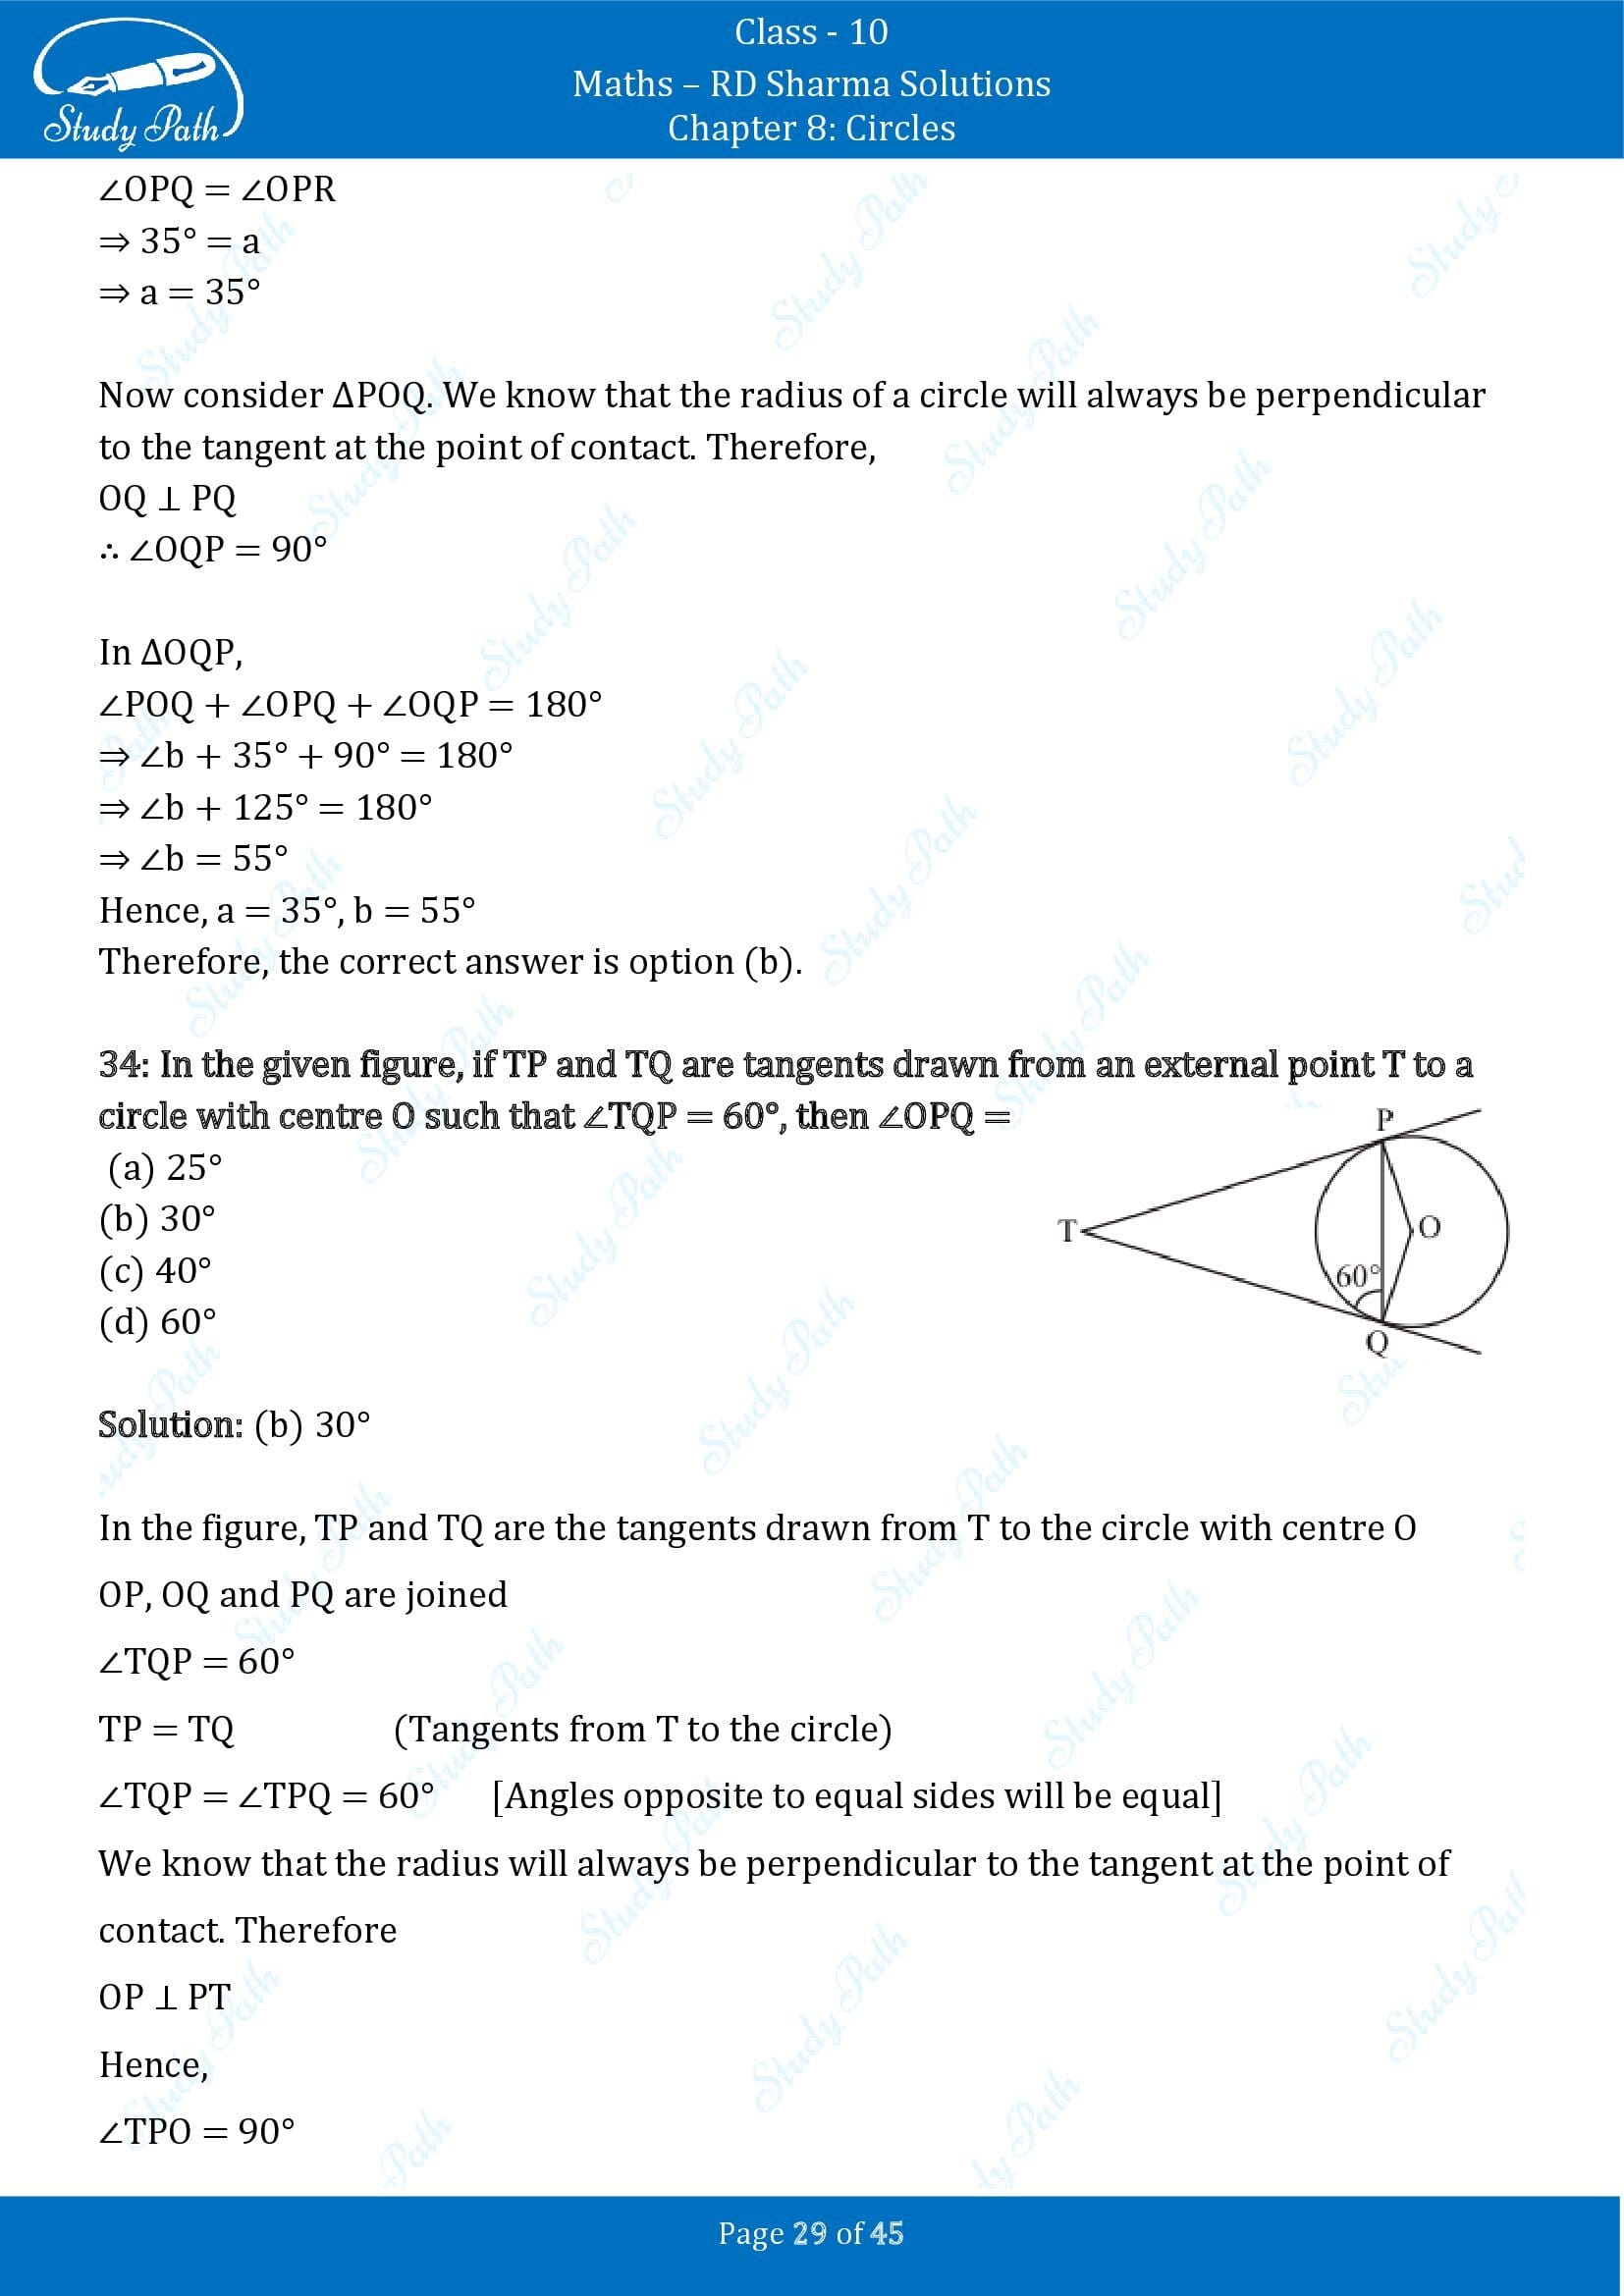 RD Sharma Solutions Class 10 Chapter 8 Circles Multiple Choice Questions MCQs 00029